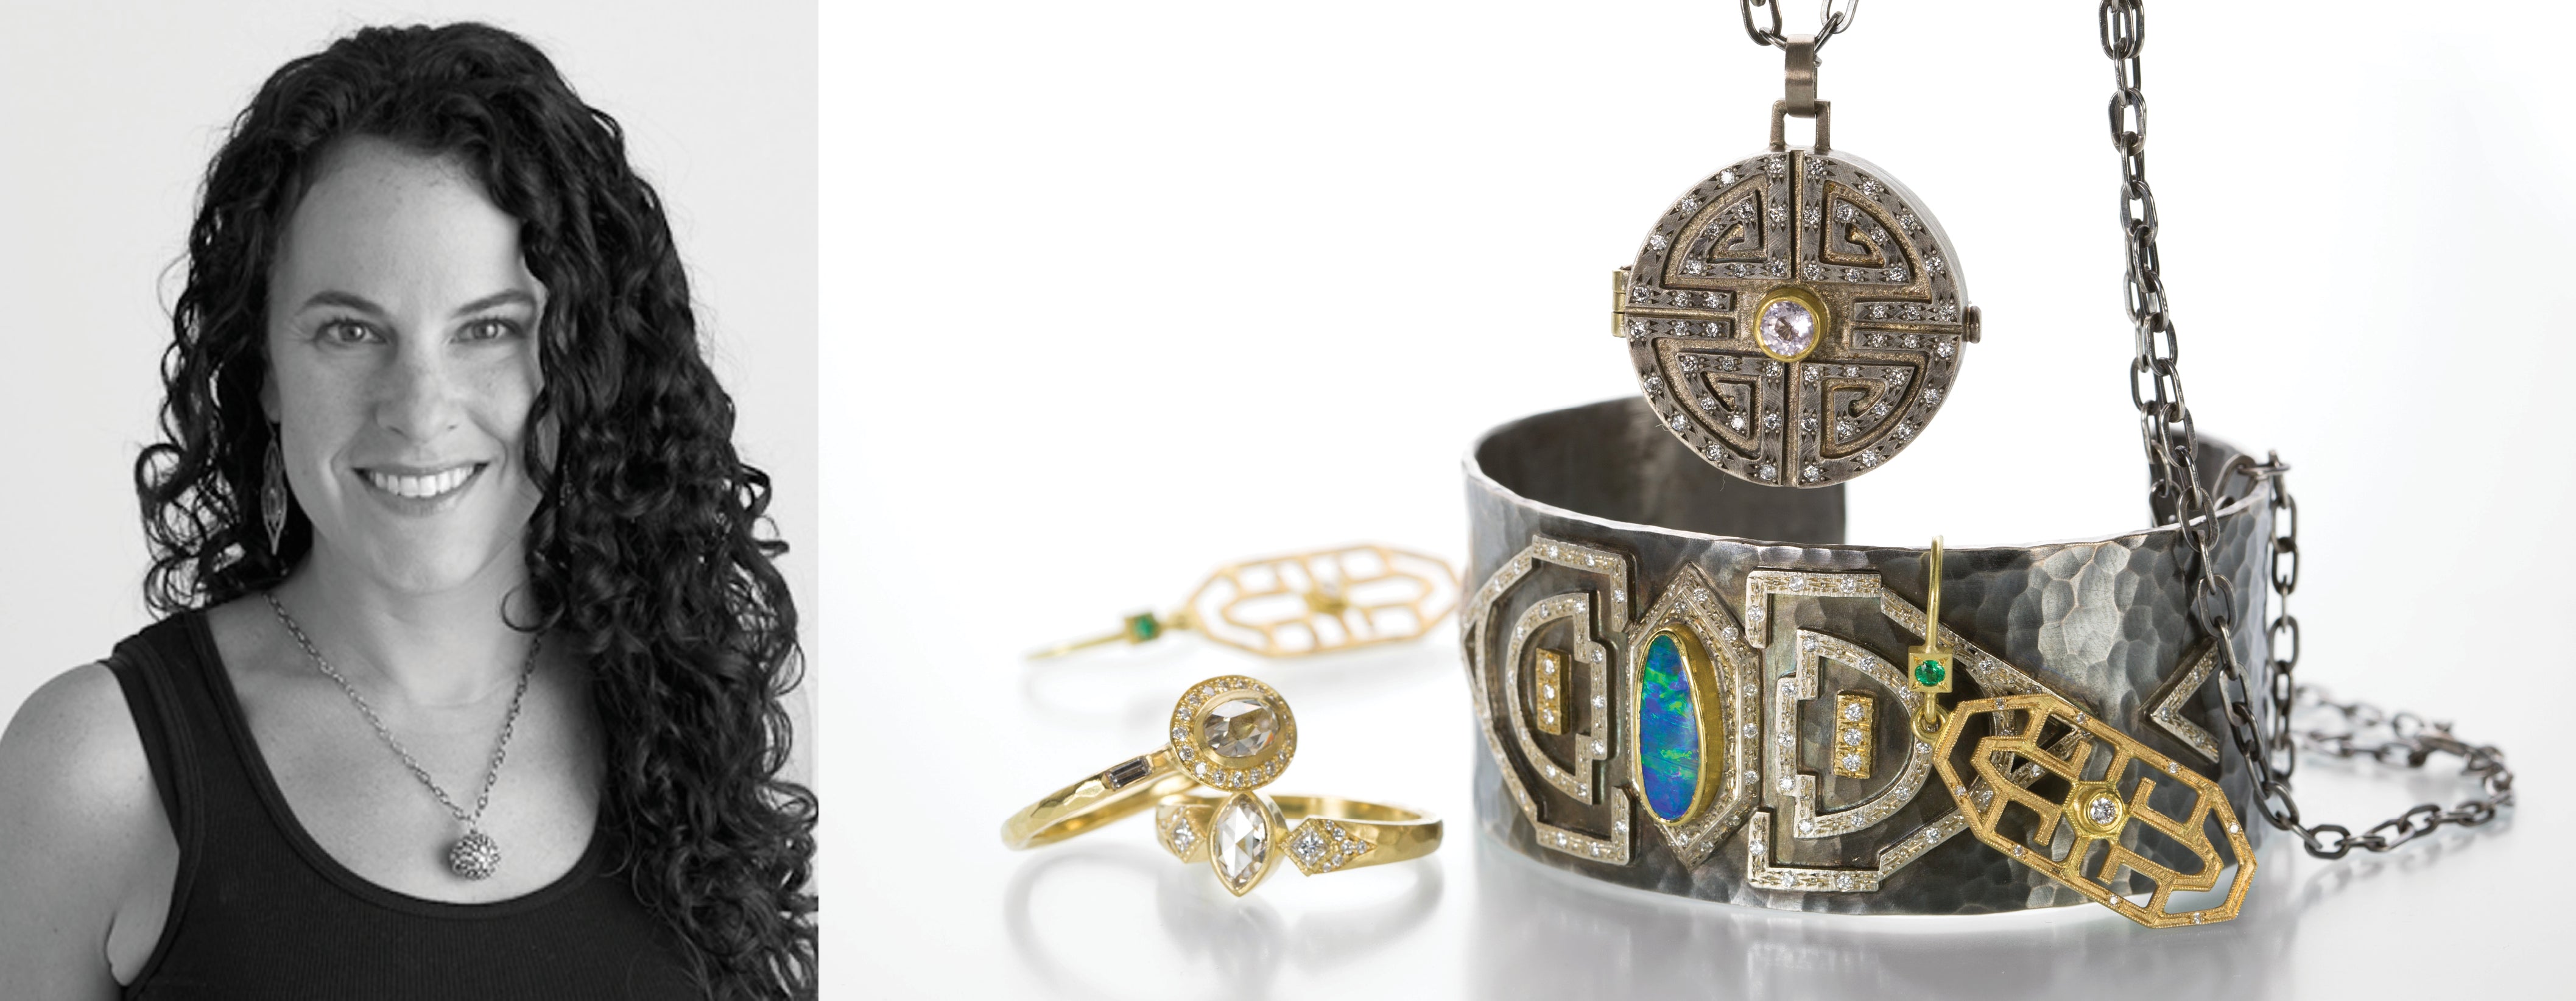 Jewelry designer Annie Fensterstock with a photo of her jewelry collection: an oxidized sterling silver cuff with opal and diamonds, an oxidized sterling silver round diamond locket, and two 18k yellow gold diamond rings